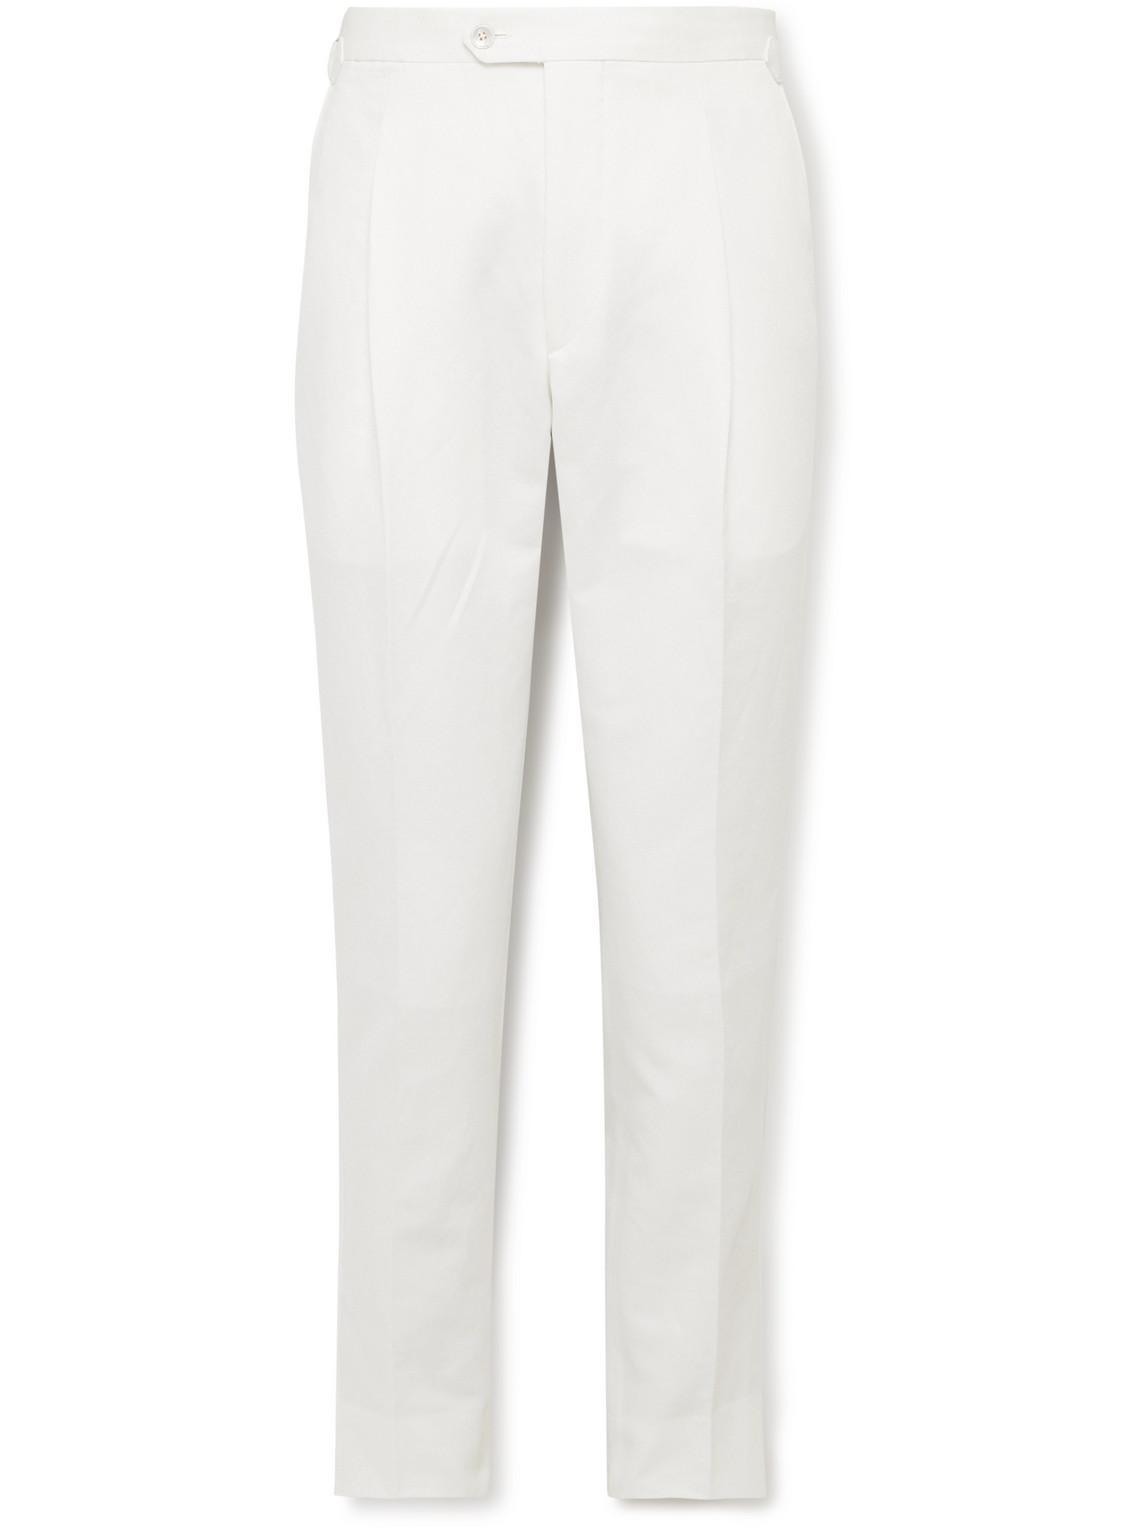 Slim-Fit Pleated Cotton and Linen-Blend Twill Trousers